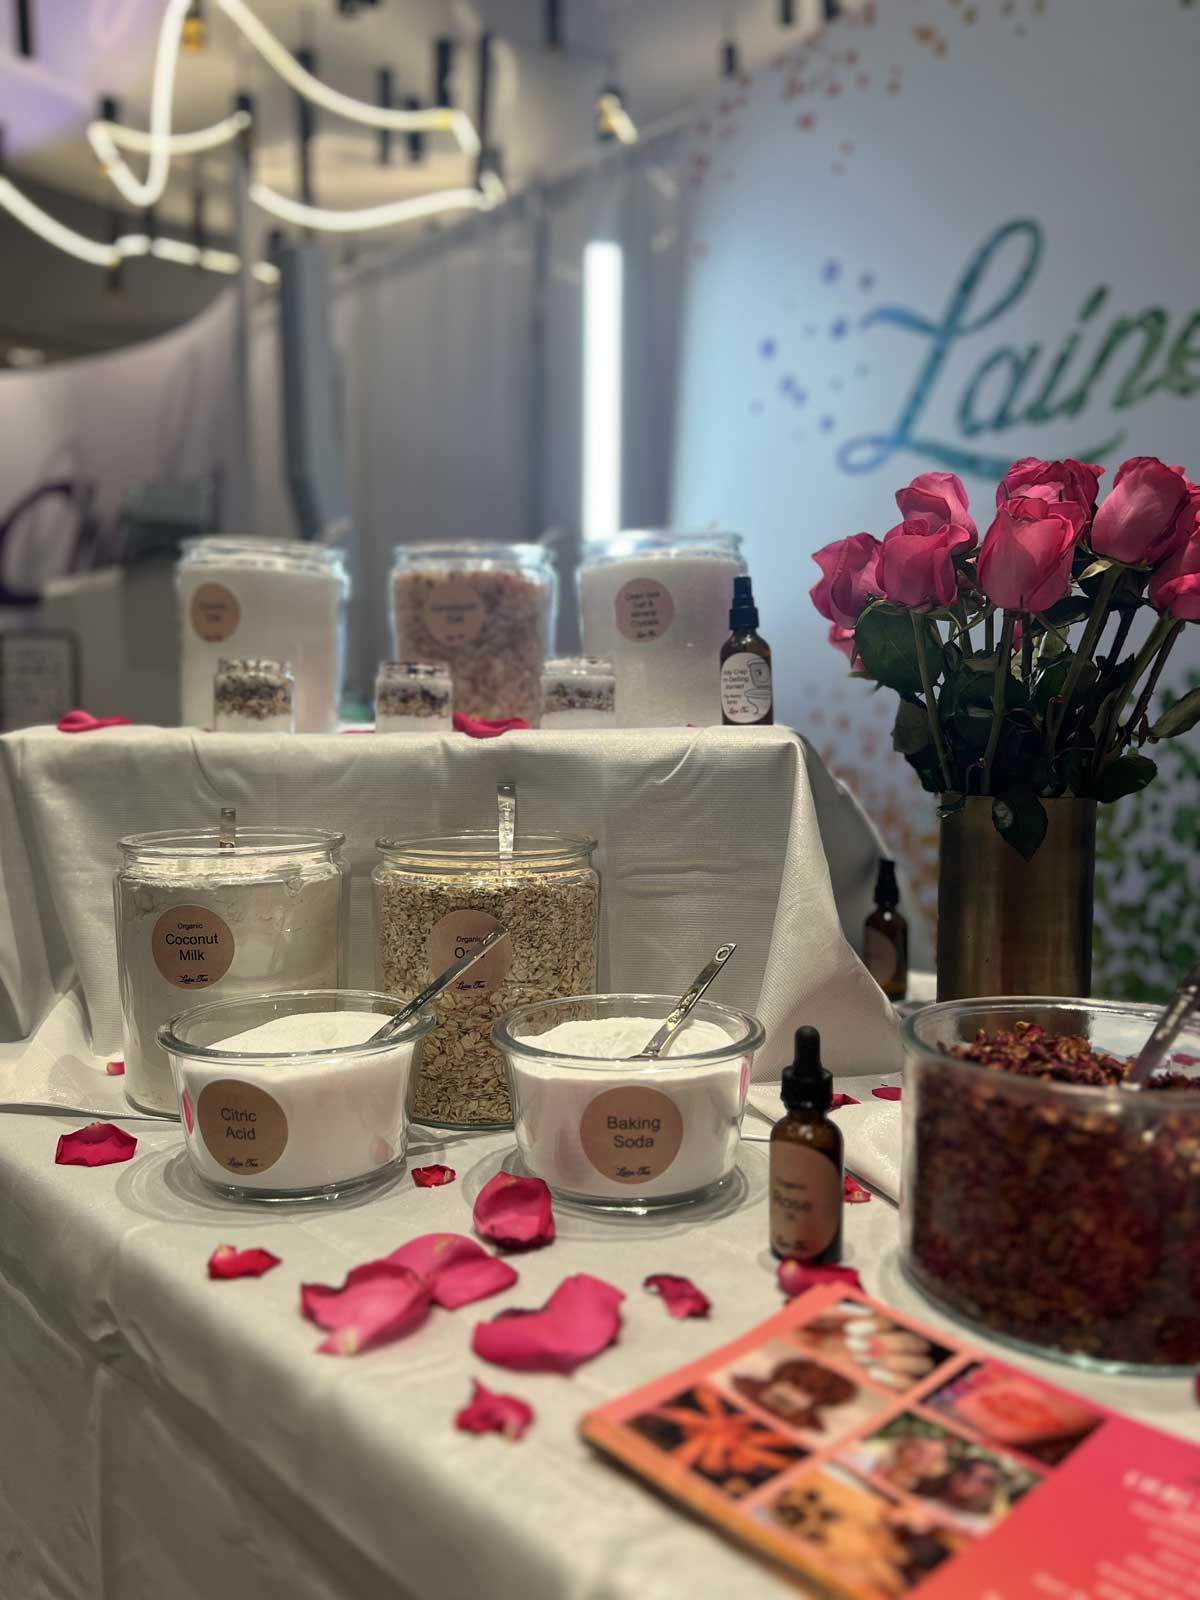 A display of beauty products with rose petals, various creams, and oils on a draped table at a promotional event.